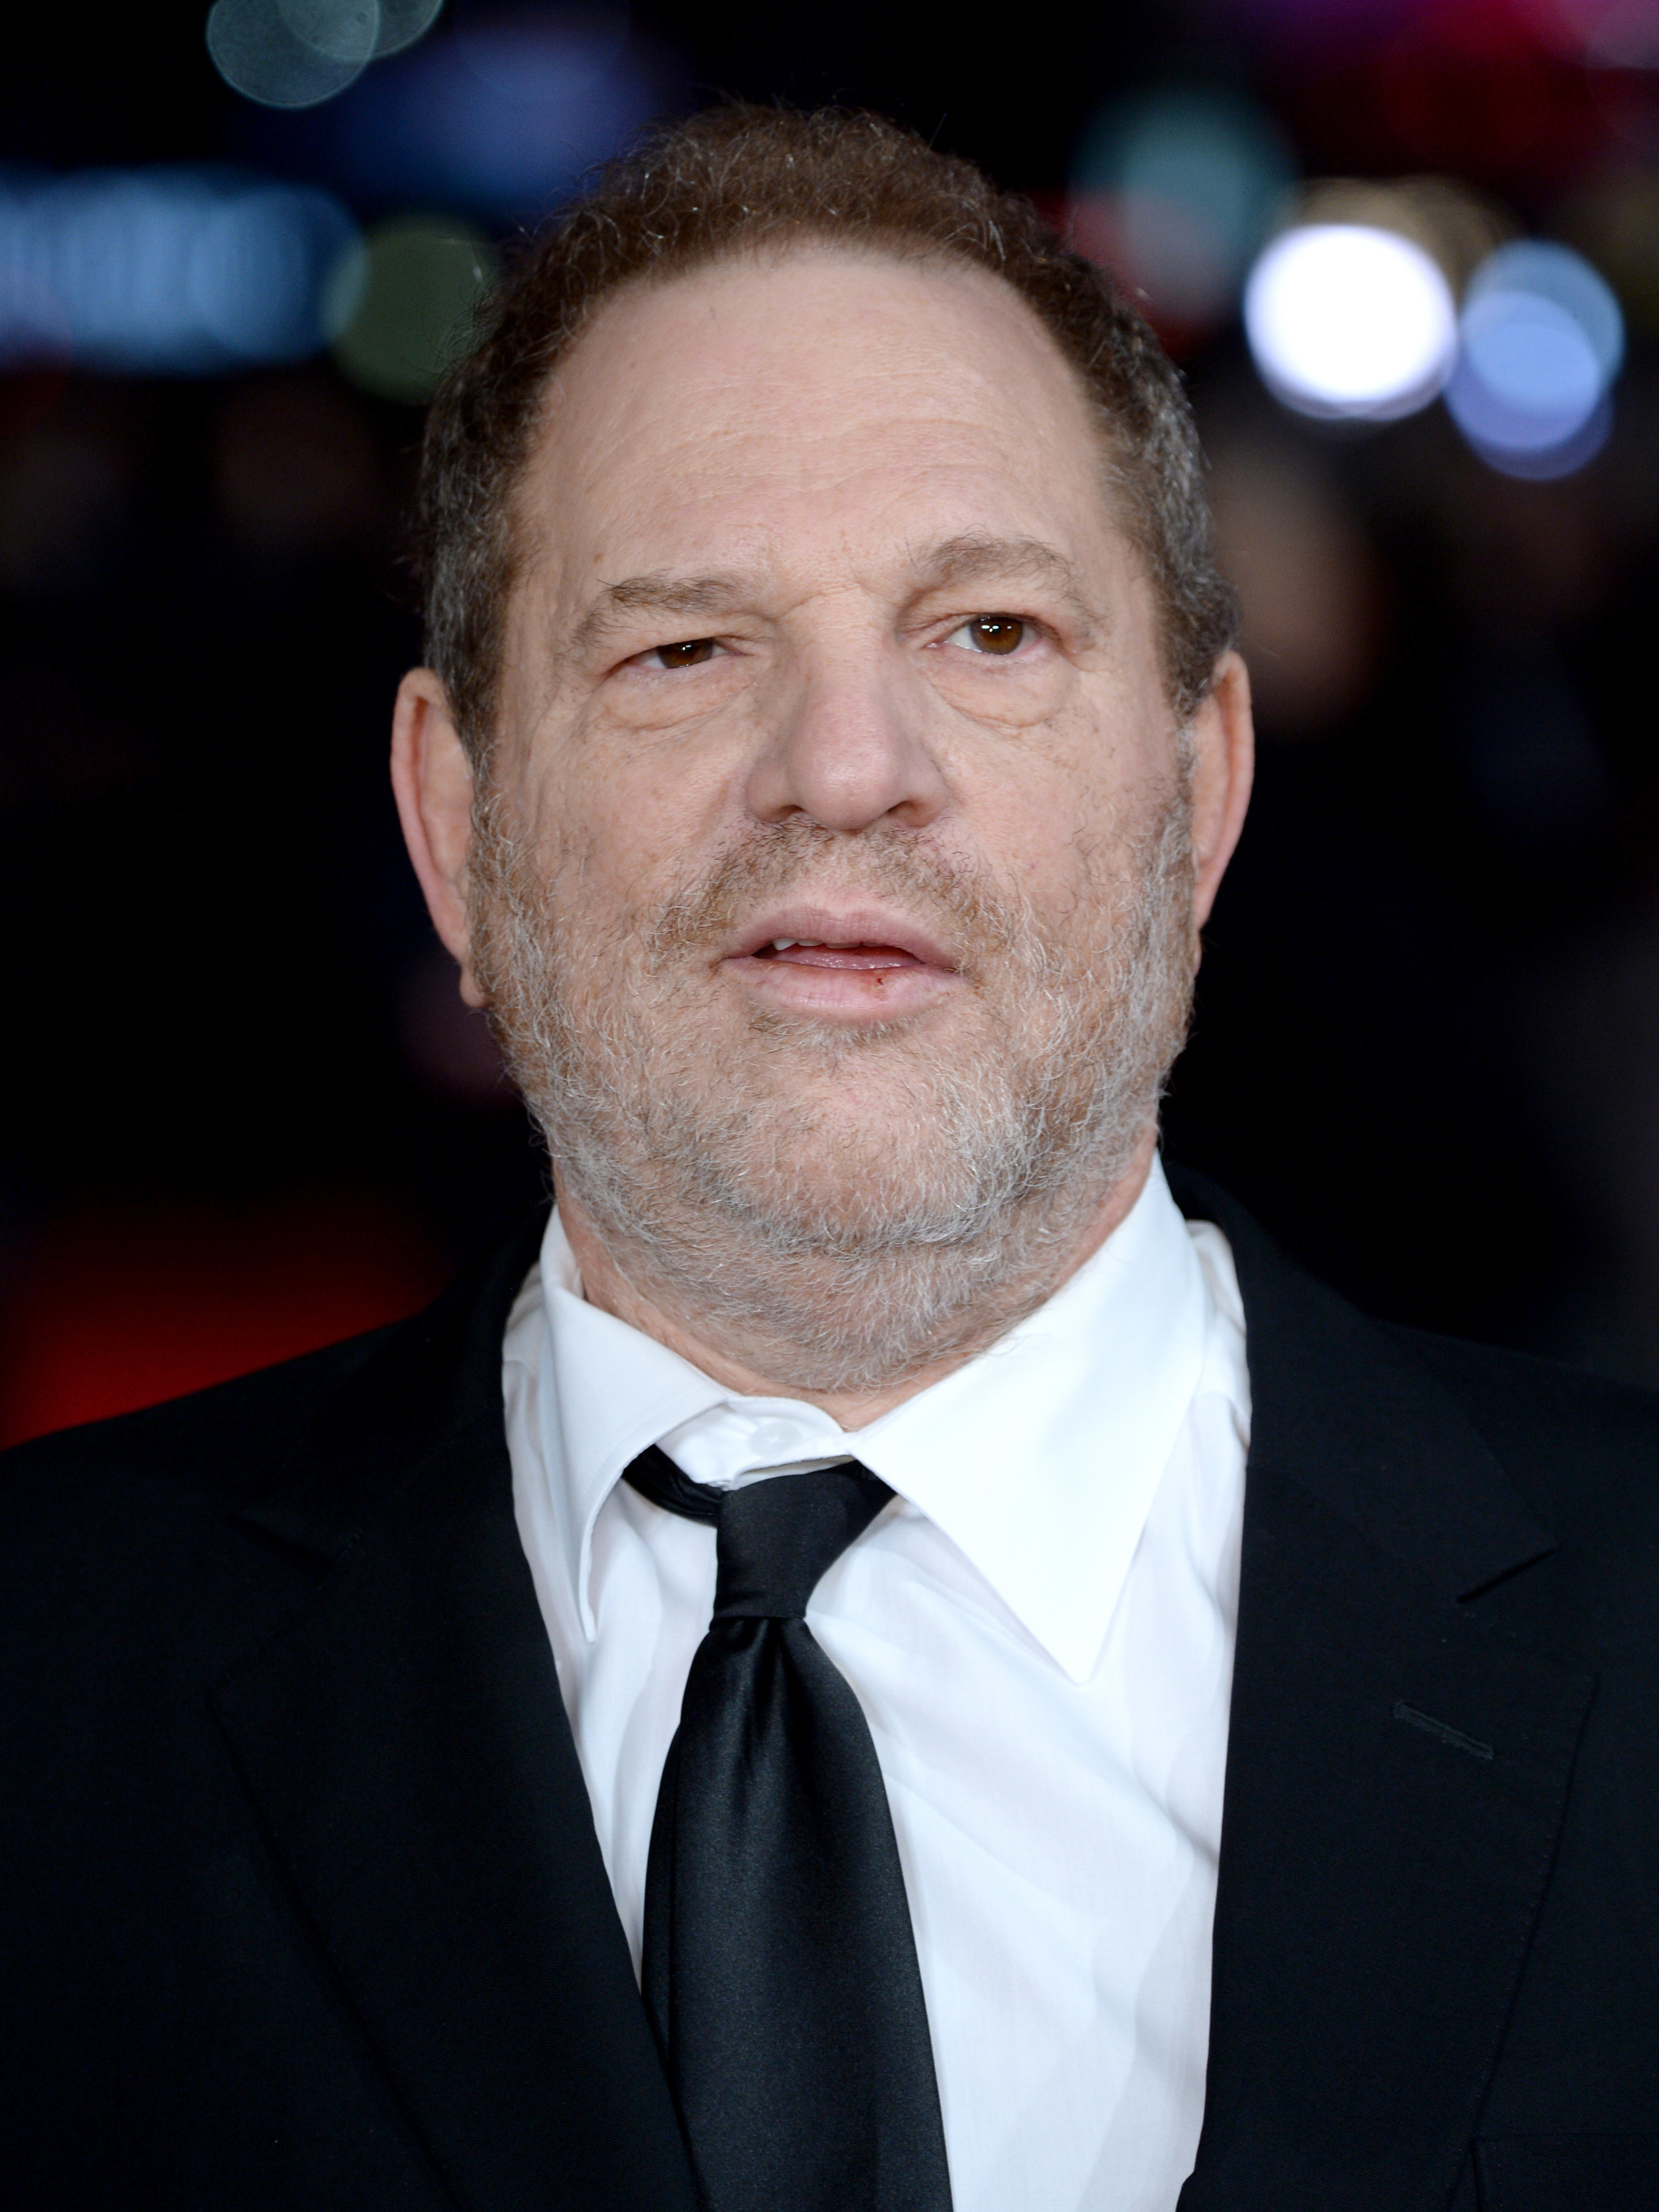 <strong>Harvey&nbsp;Weinstein has denied having non-consensual sex with anyone.</strong>